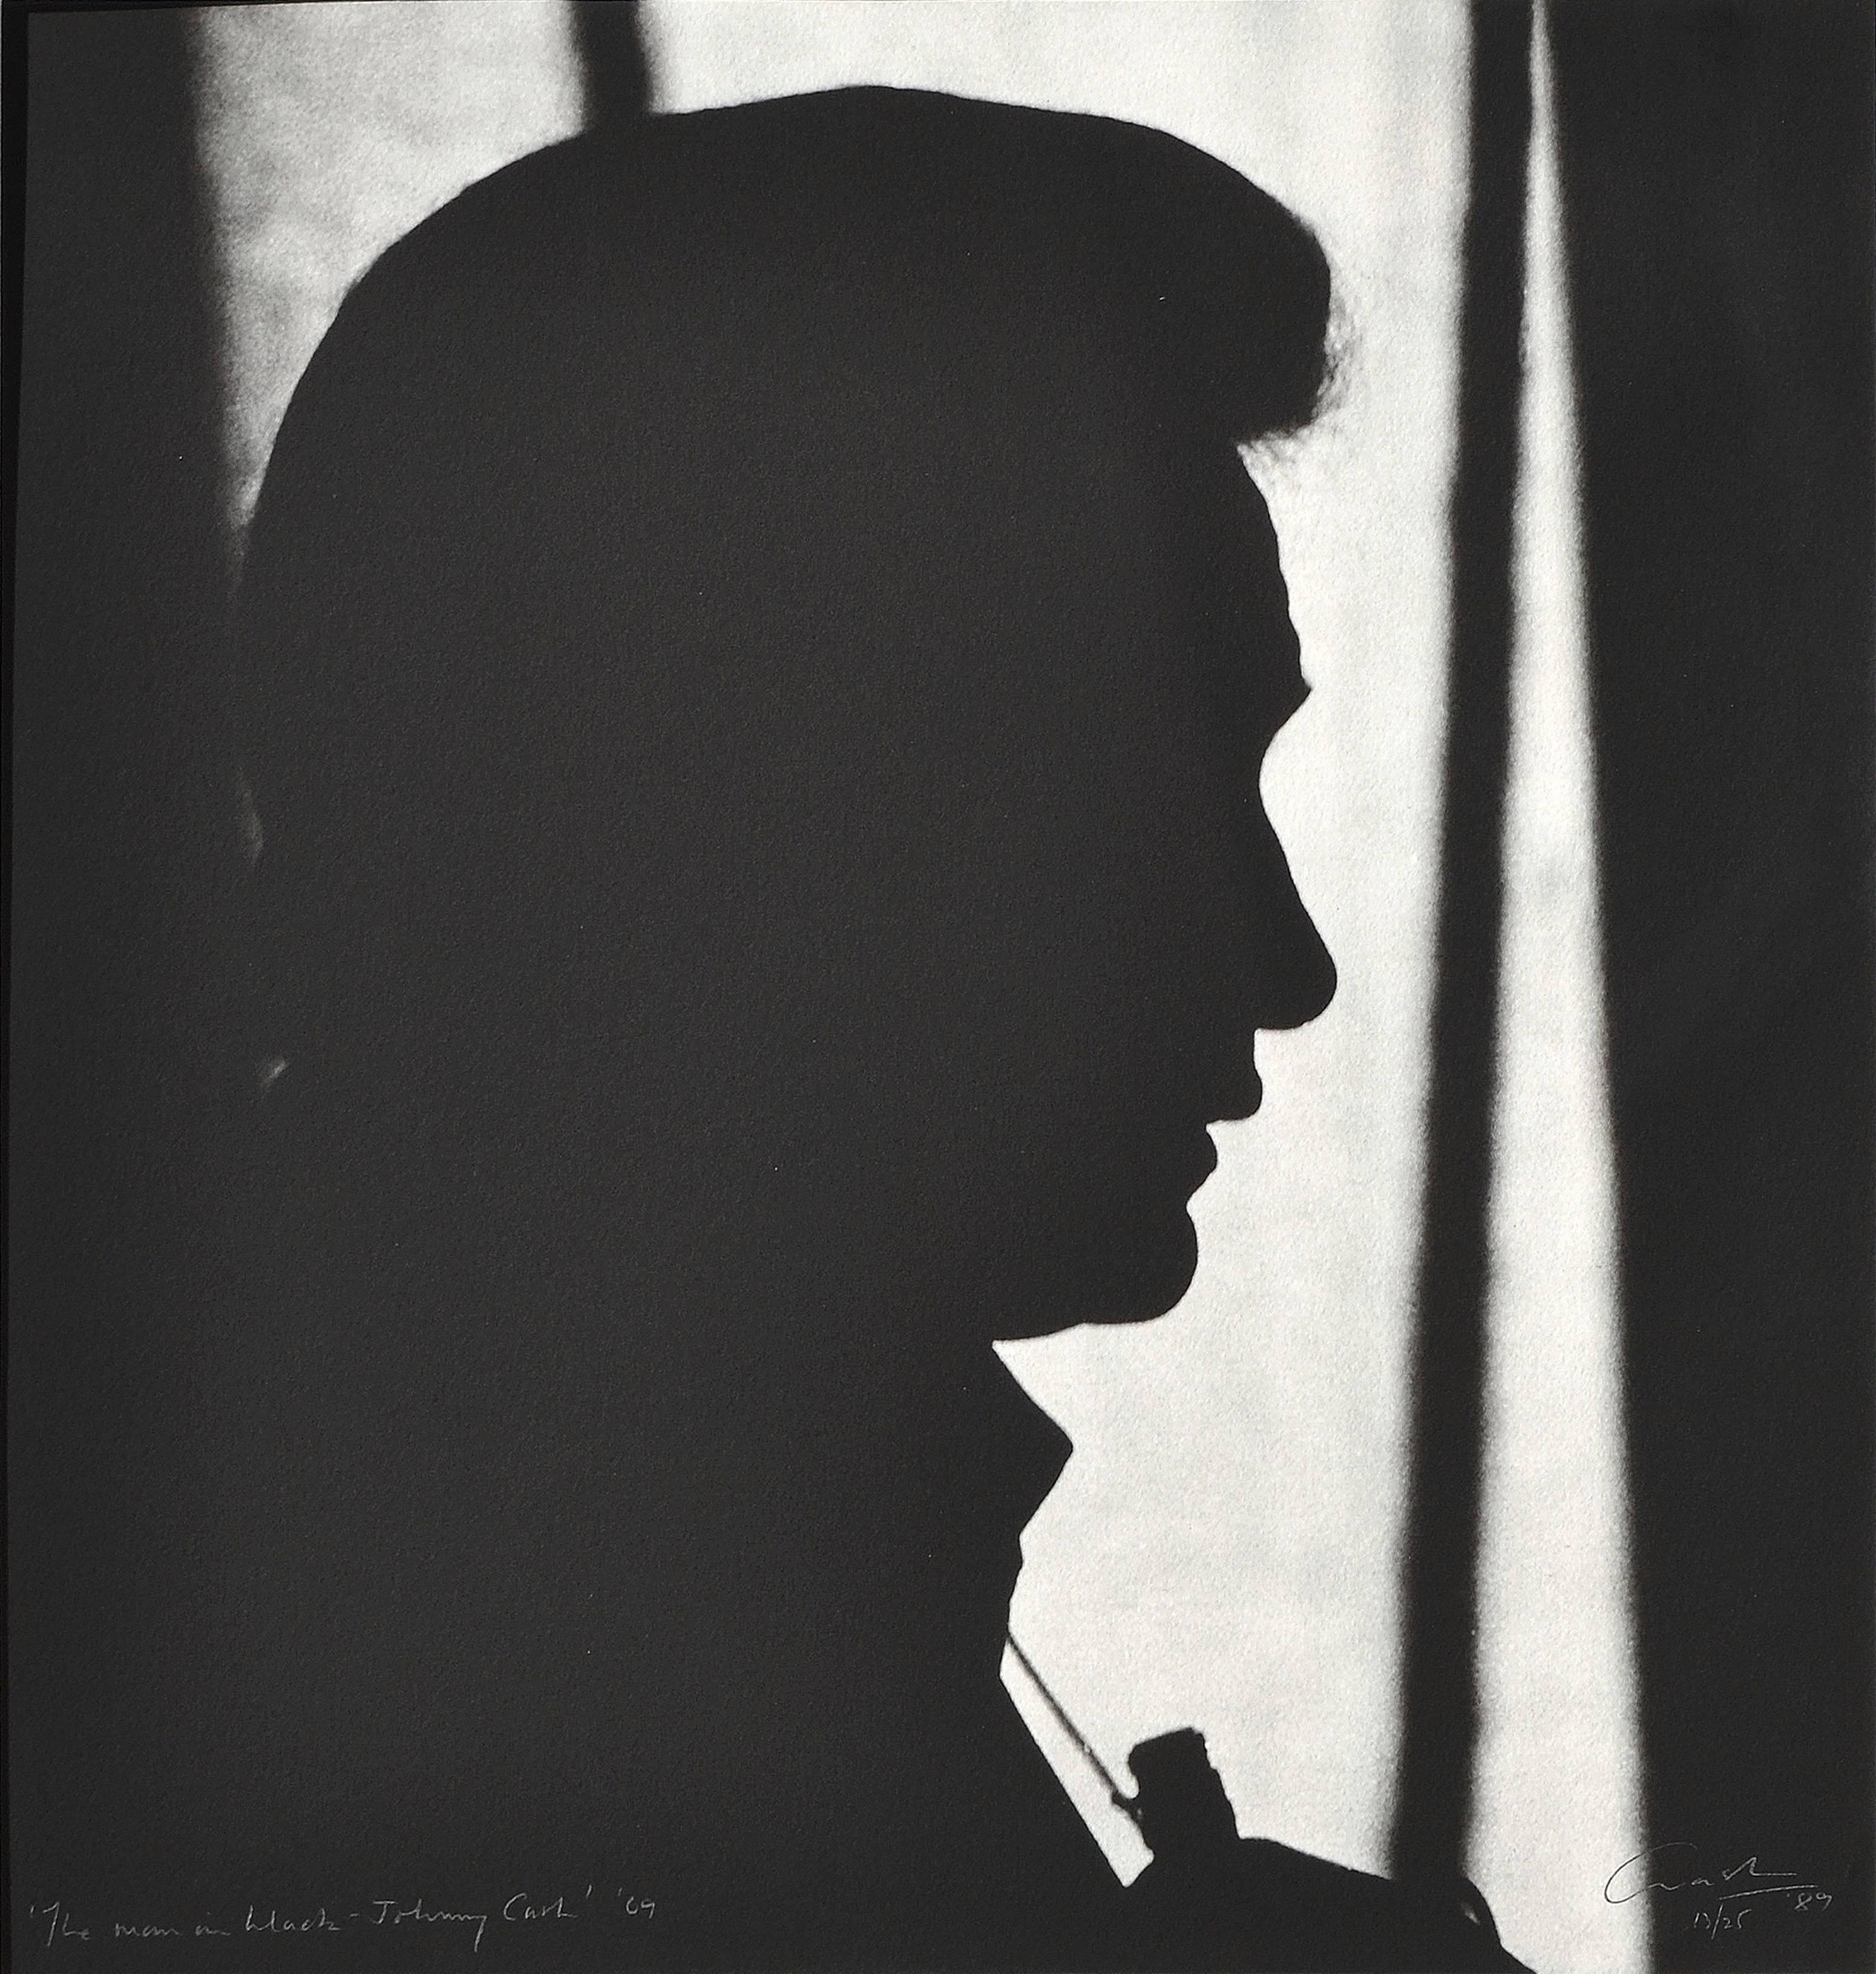 The Man in Black - Johnny Cash '69 - Photograph by Graham Nash